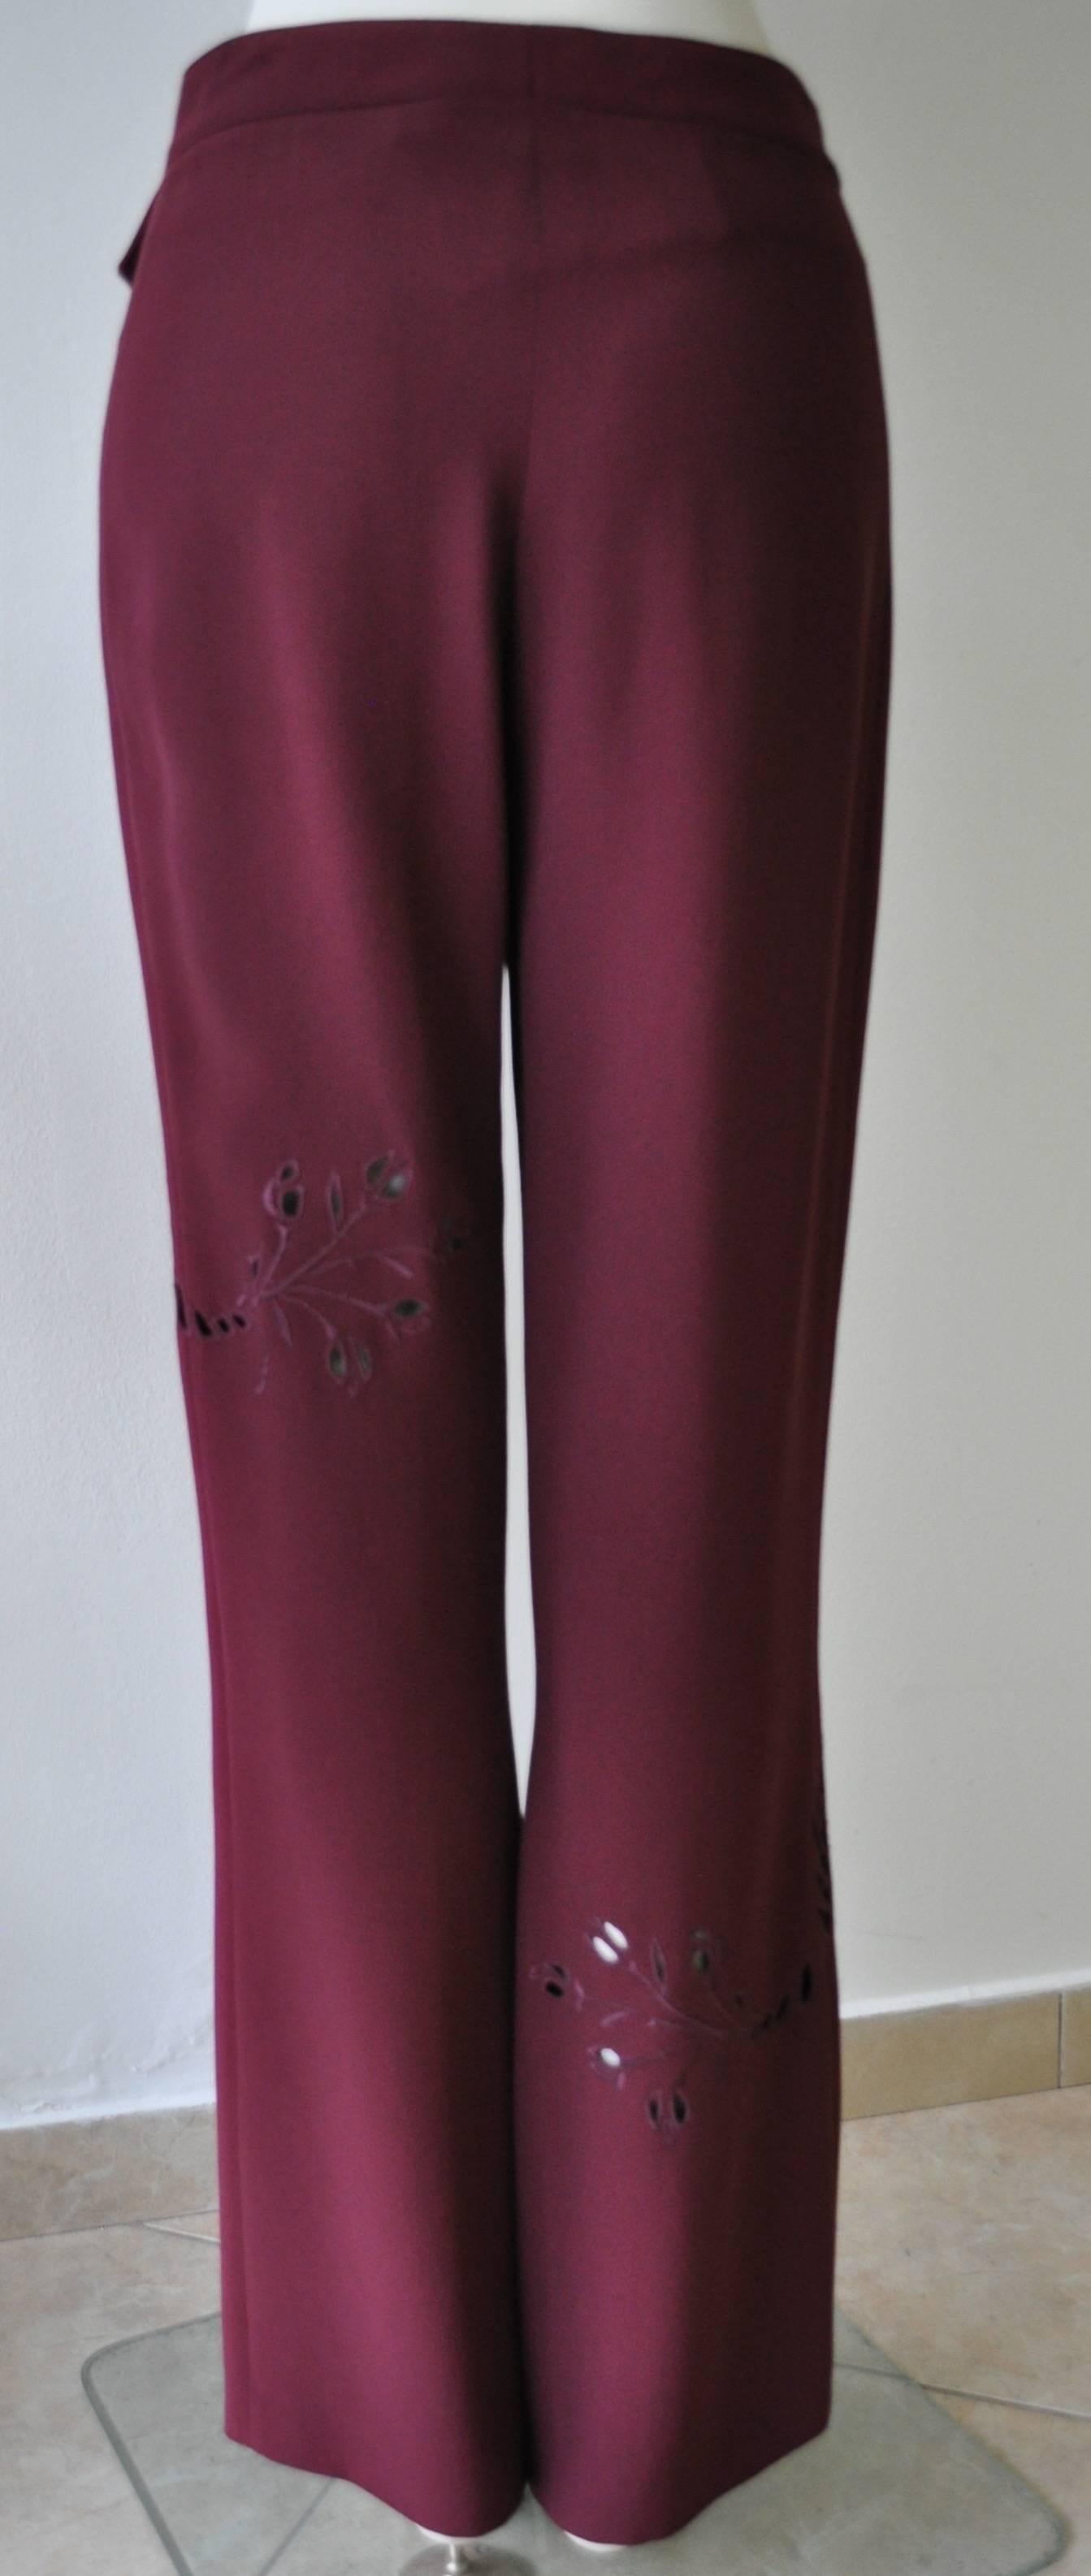 Angelo Mozzillo Higihly Original Embroidered Laser-Cut Pants In New Condition For Sale In Athens, Agia Paraskevi